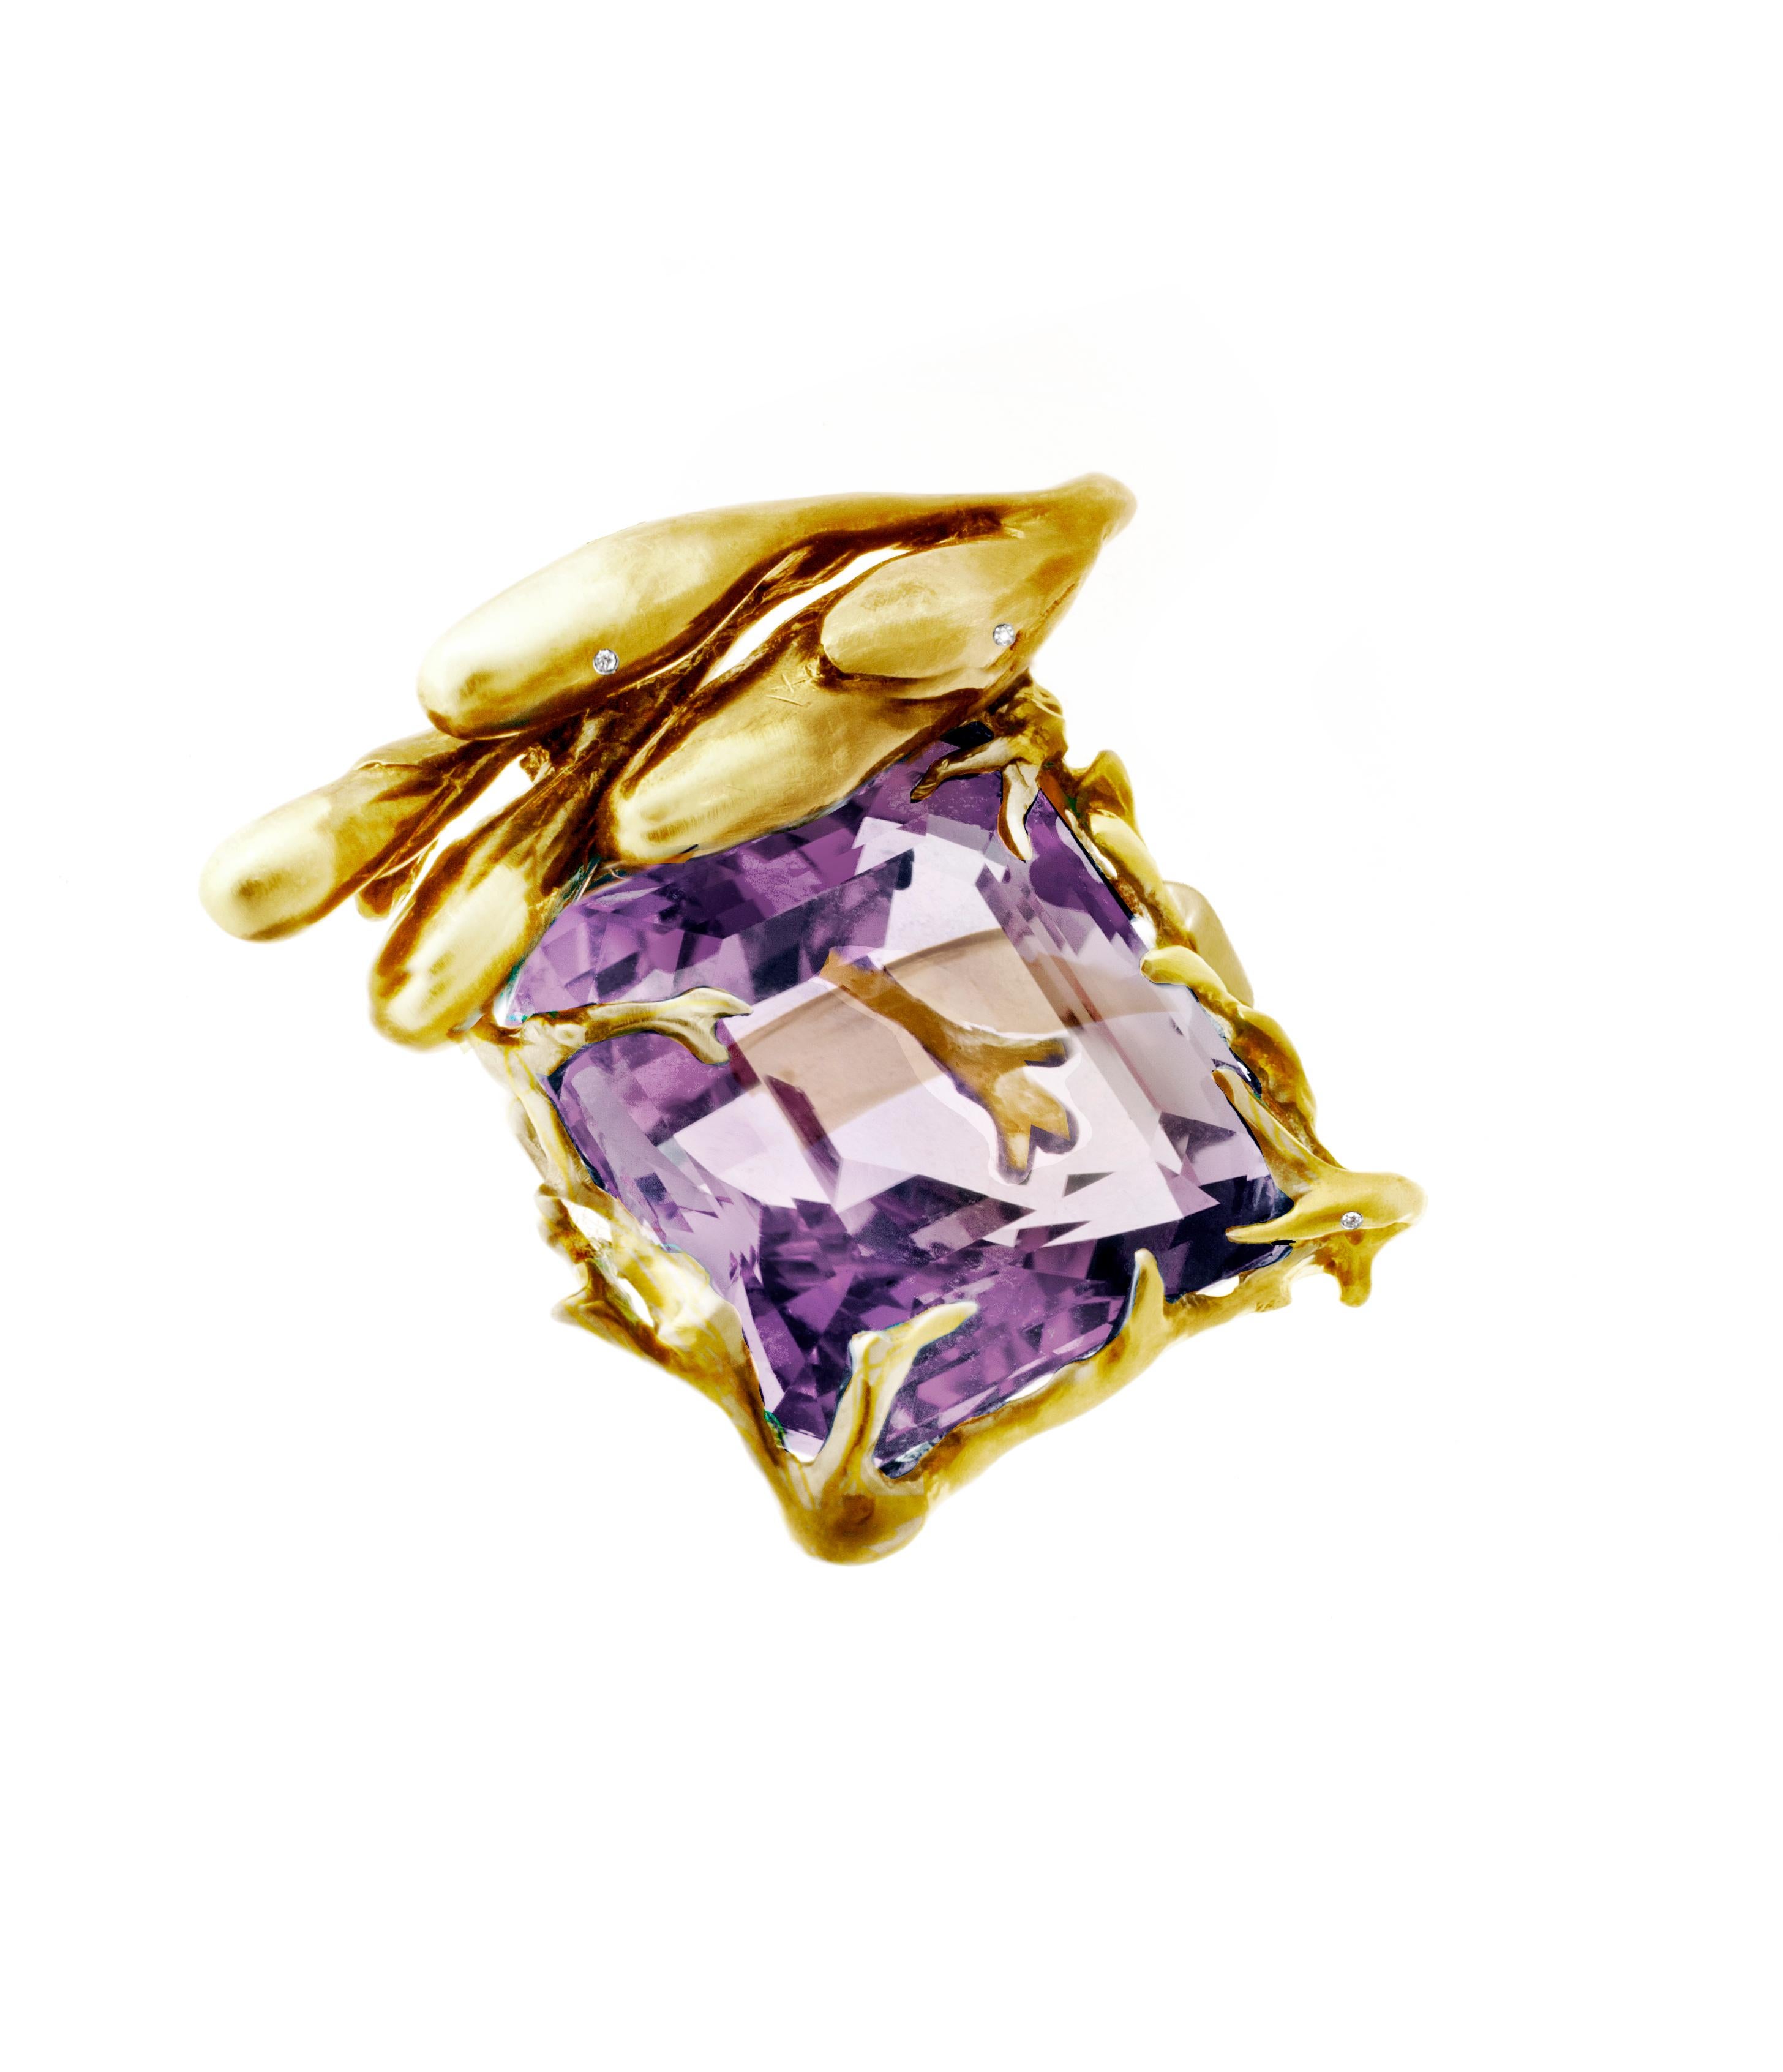 This is a Fairy Tale ring made of 14 karat yellow gold with a large amethyst gemstone. The ring has 7 diamonds encrusted in it and was featured in a published issue of Vogue UA. It was designed by artist and oil painter Polya Medvedeva, who has been